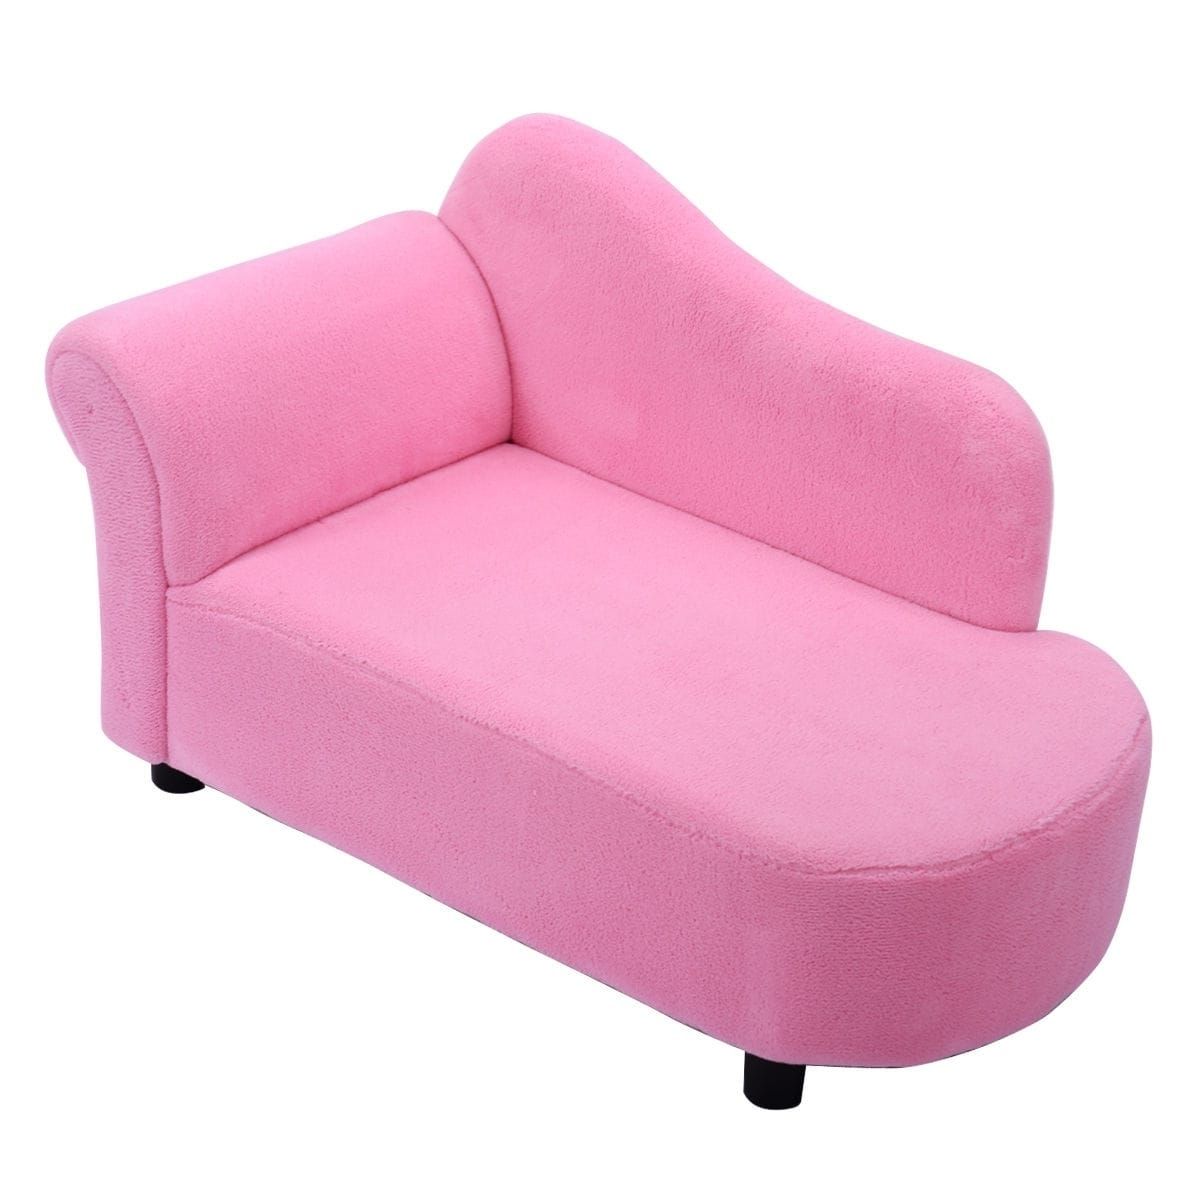 Cheap Kids Sofas With Regard To Widely Used Costway Kids Sofa Armrest Chair Couch Lounge In Pink – Free (View 5 of 15)